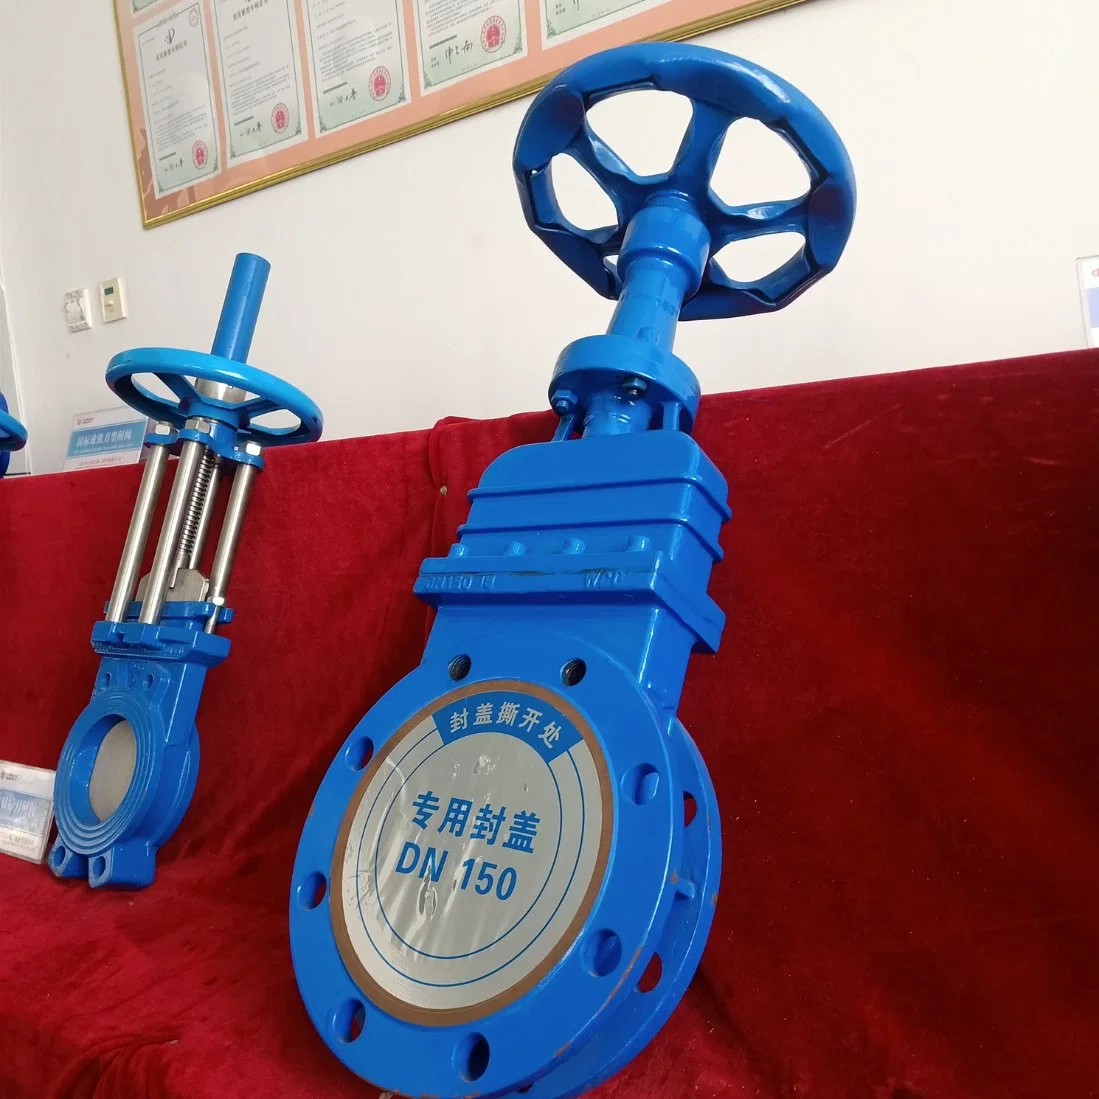 Wcb Ductile Iron Stainless Steel Bonnet Wafer Knife Gate Valve